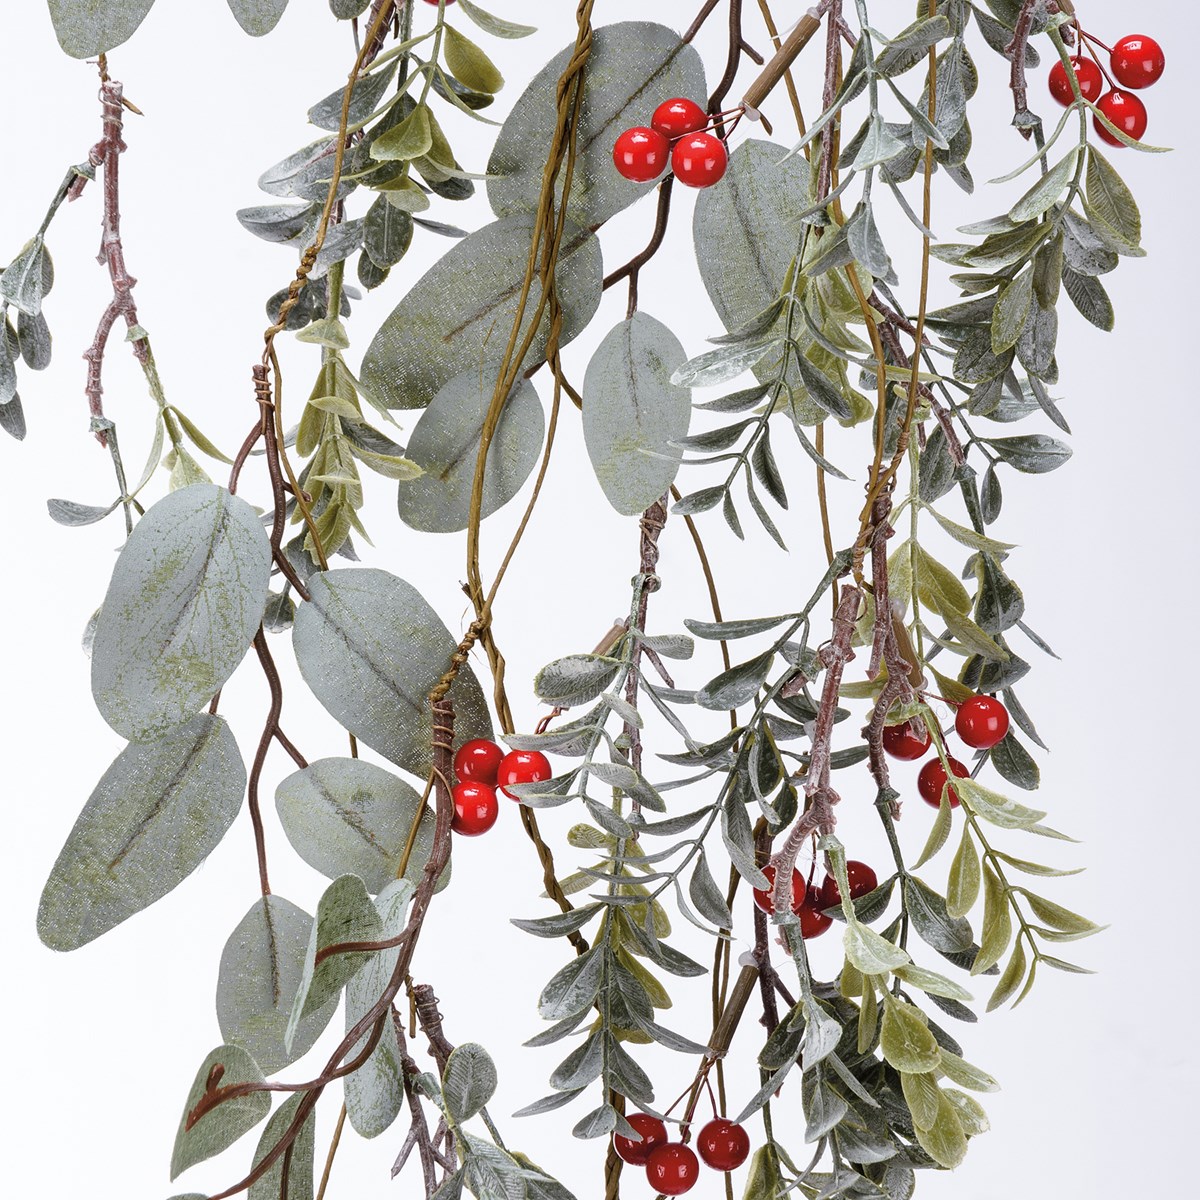 Eucalyptus And Berries Garland - Plastic, Wire, Fabric